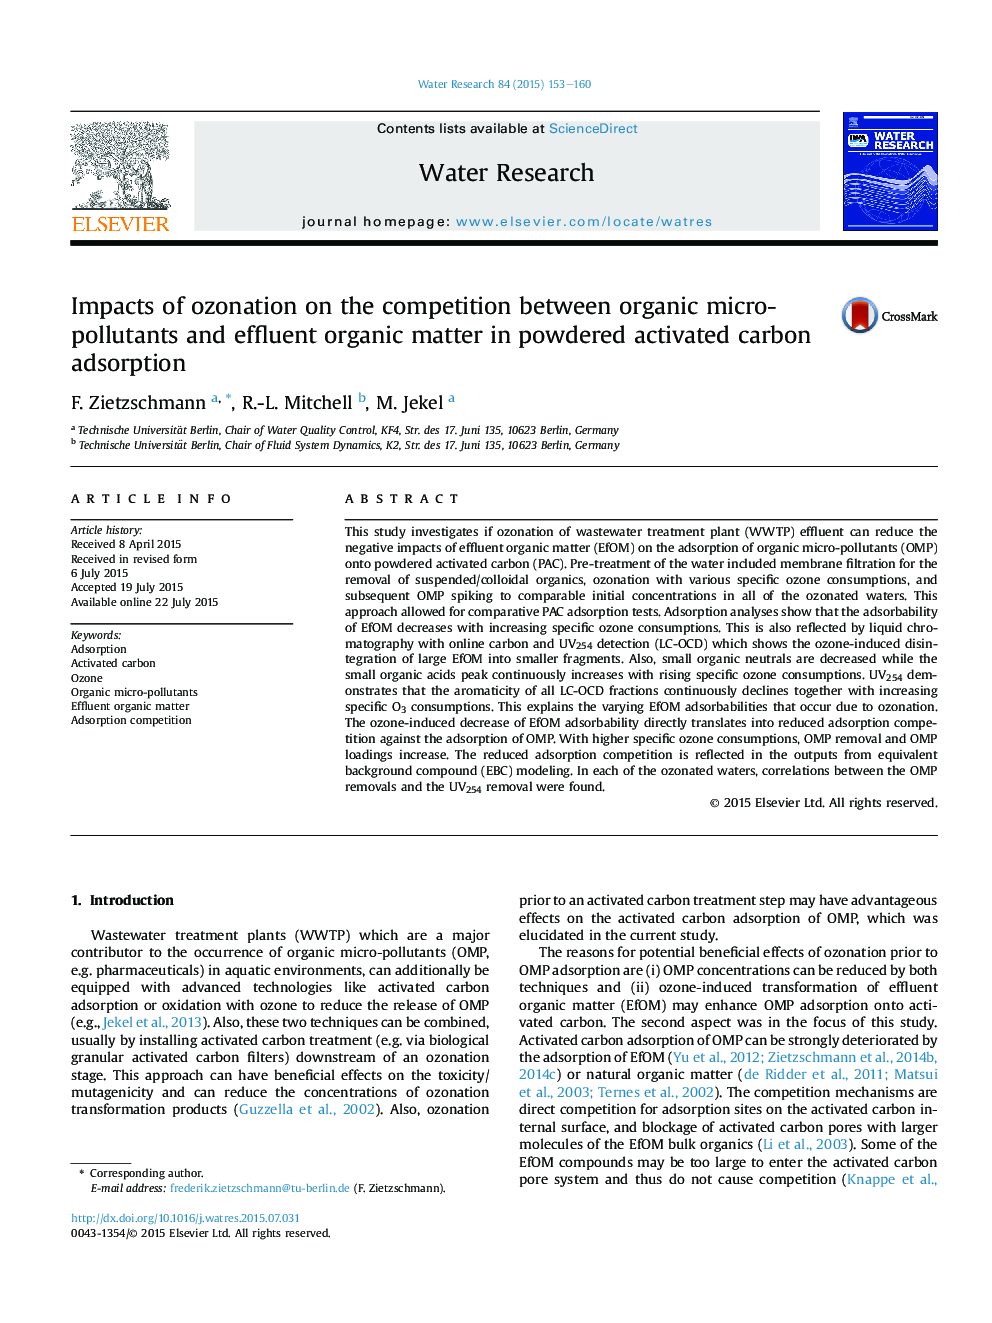 Impacts of ozonation on the competition between organic micro-pollutants and effluent organic matter in powdered activated carbon adsorption